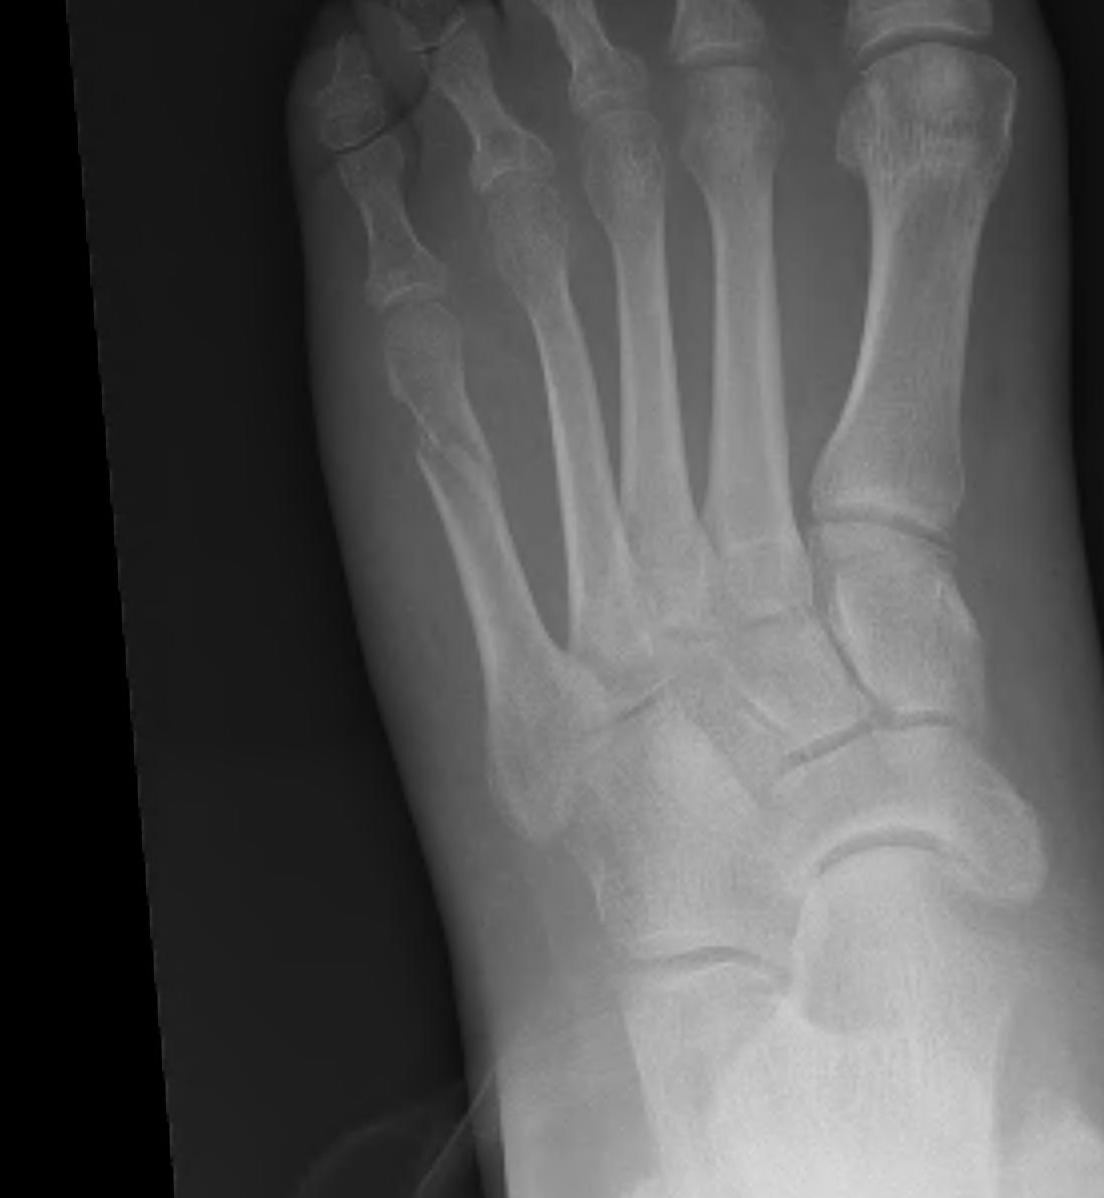 Fifth Metatarsal Neck Fracture